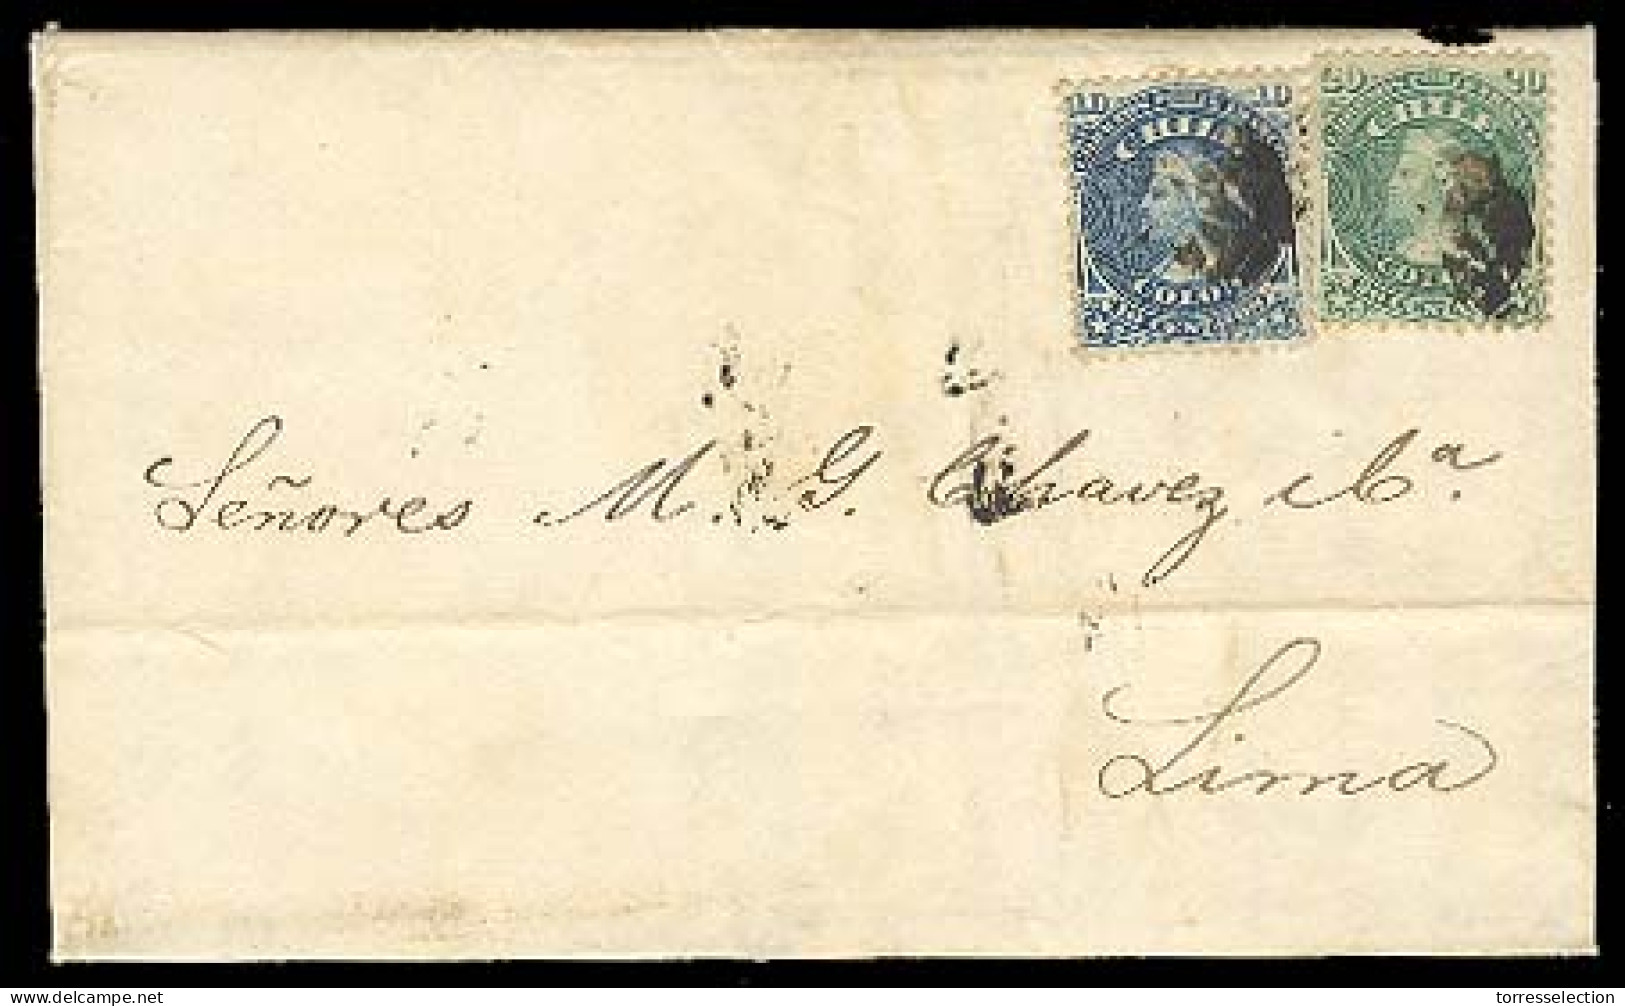 CHILE. 1872. Valparaiso - Lima. EL. Fkd 10c Blue + 20c Green Engraved Issue, Cork Cancels.VF. - Cile